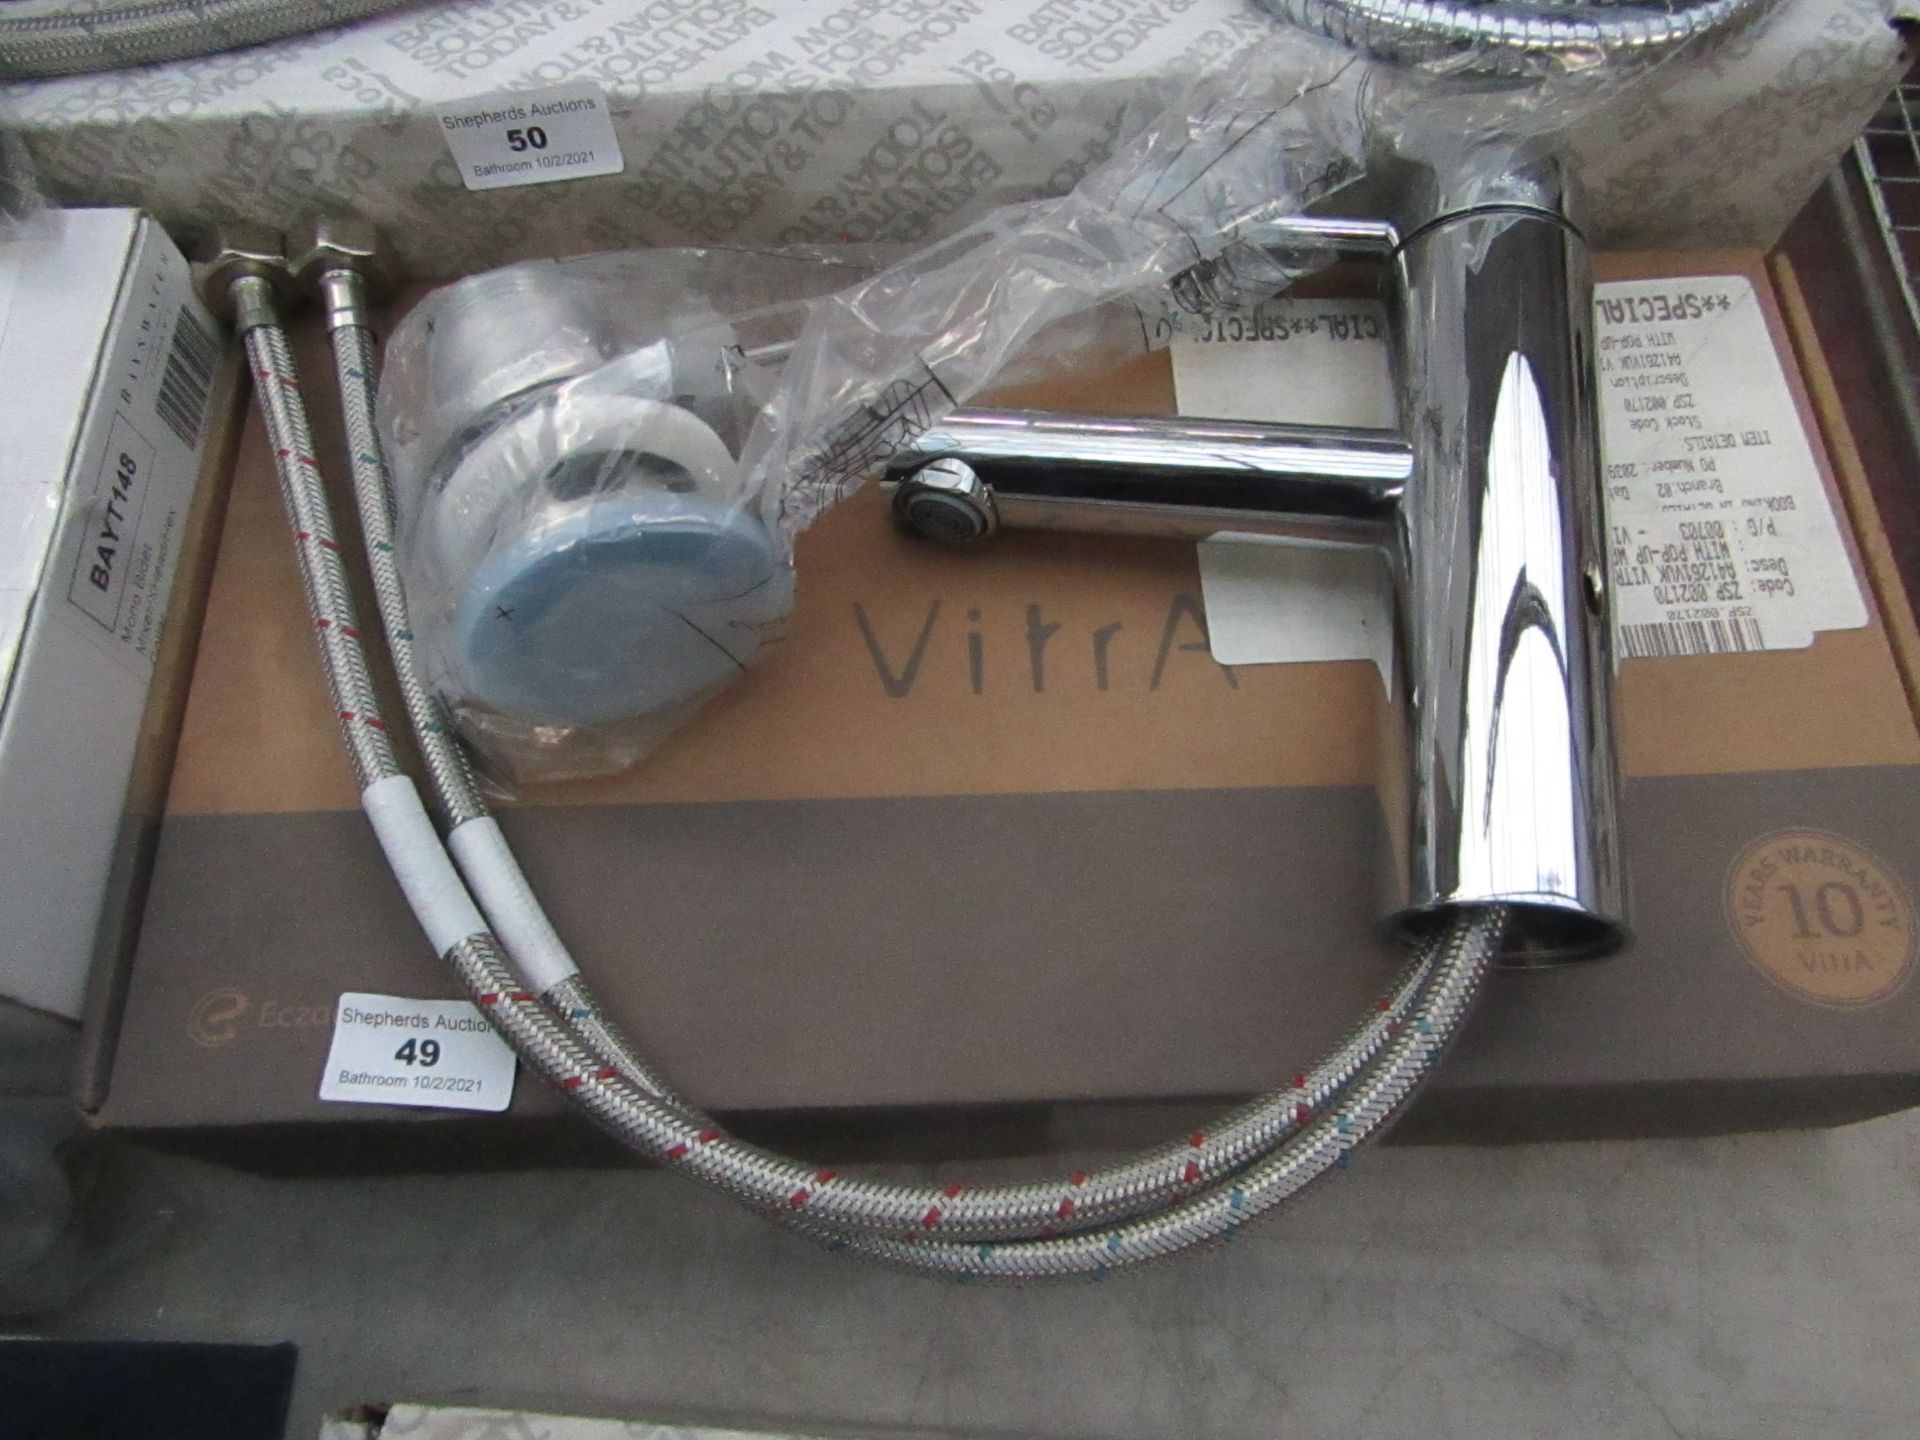 Vitra Pure basin mixer with pop up waste, new and boxed.